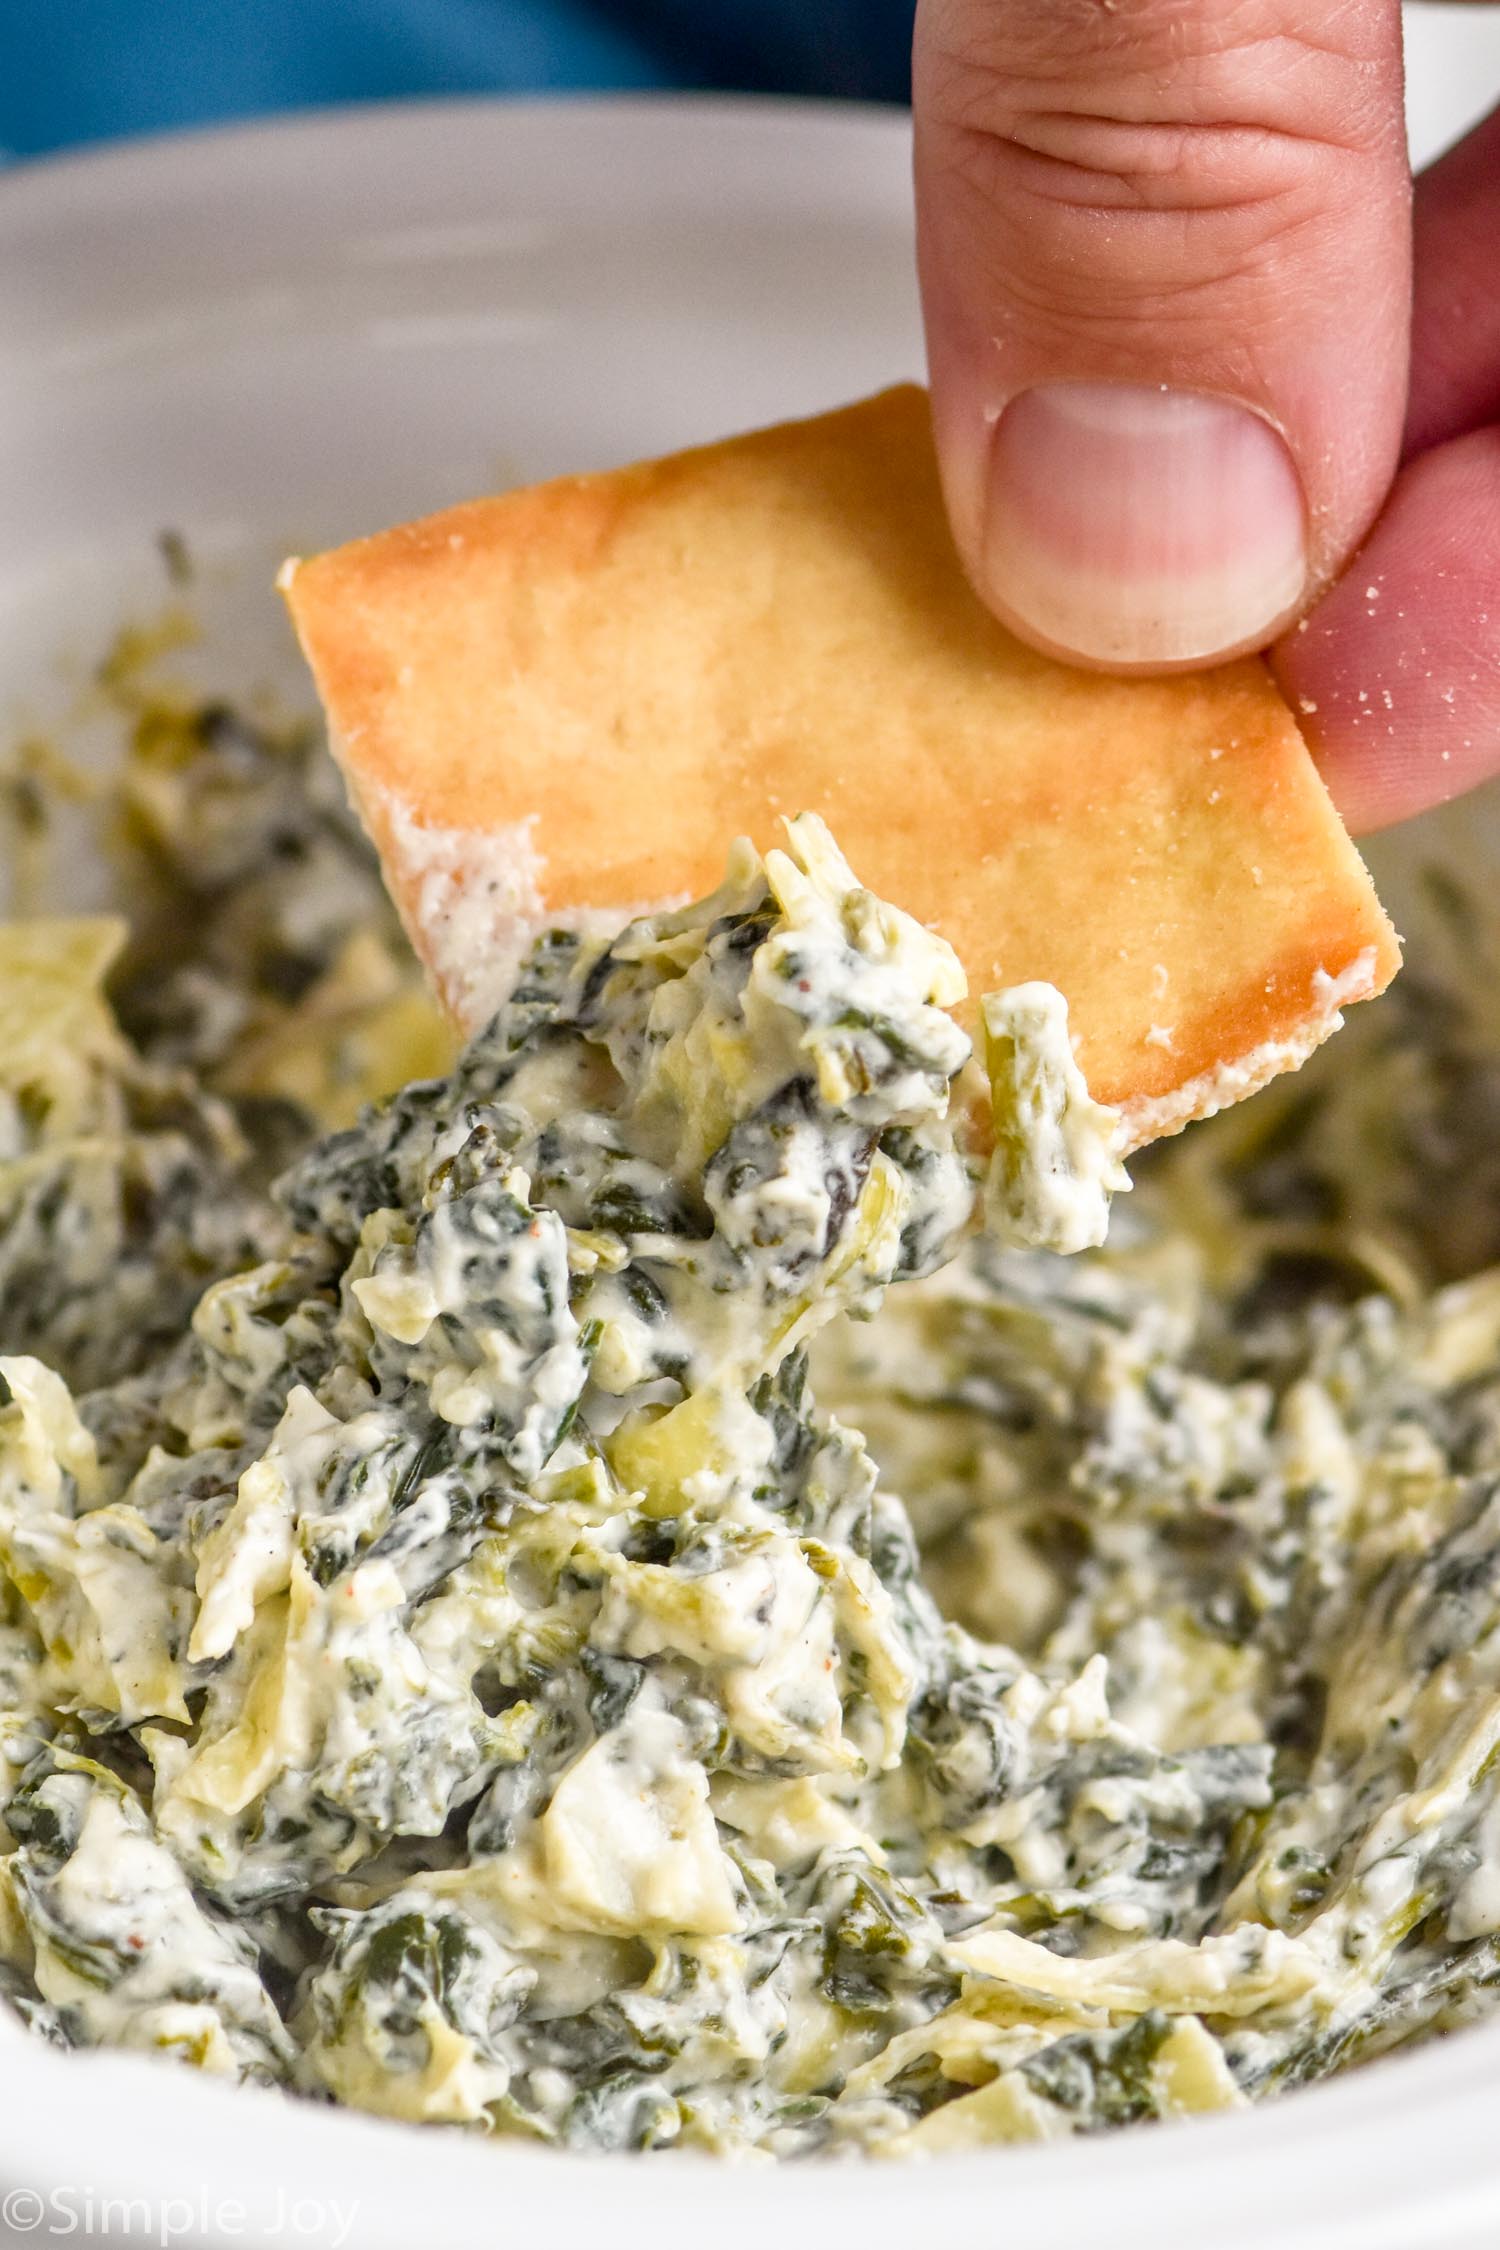 Slow Cooker Cheesy Spinach and Artichoke Dip (Quick and Easy)